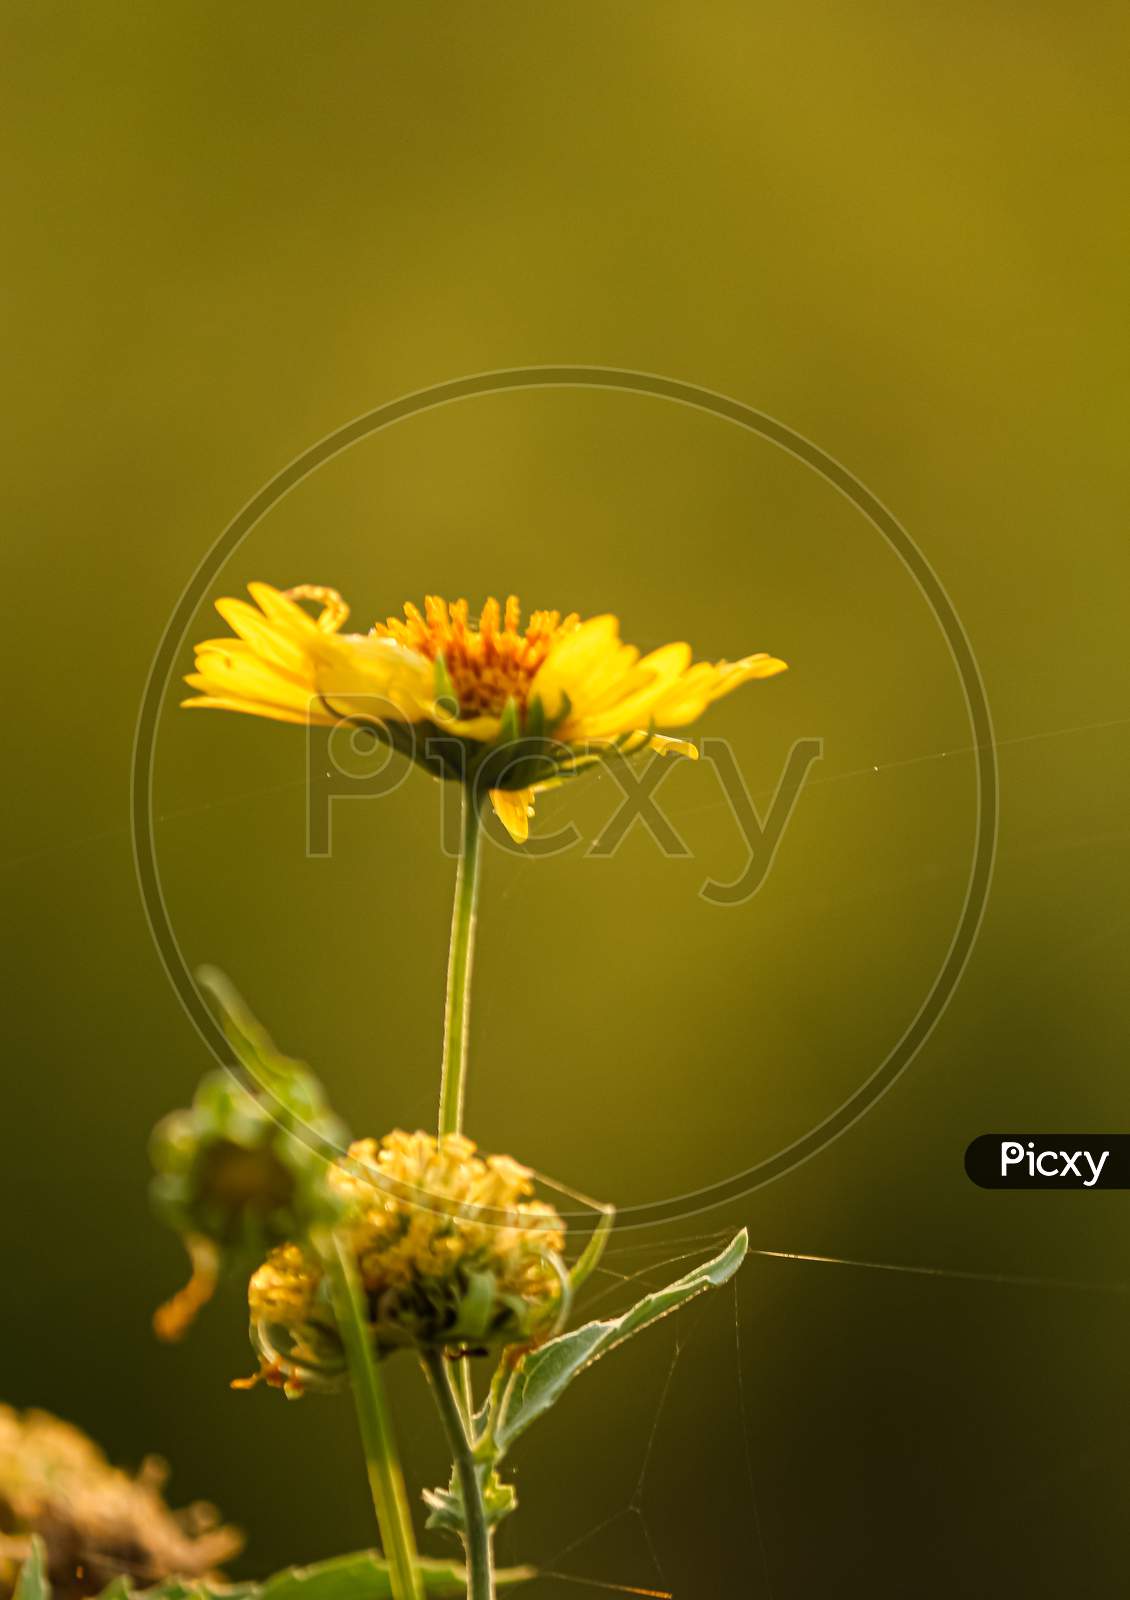 A bright yellow wildflower blooming on a green background